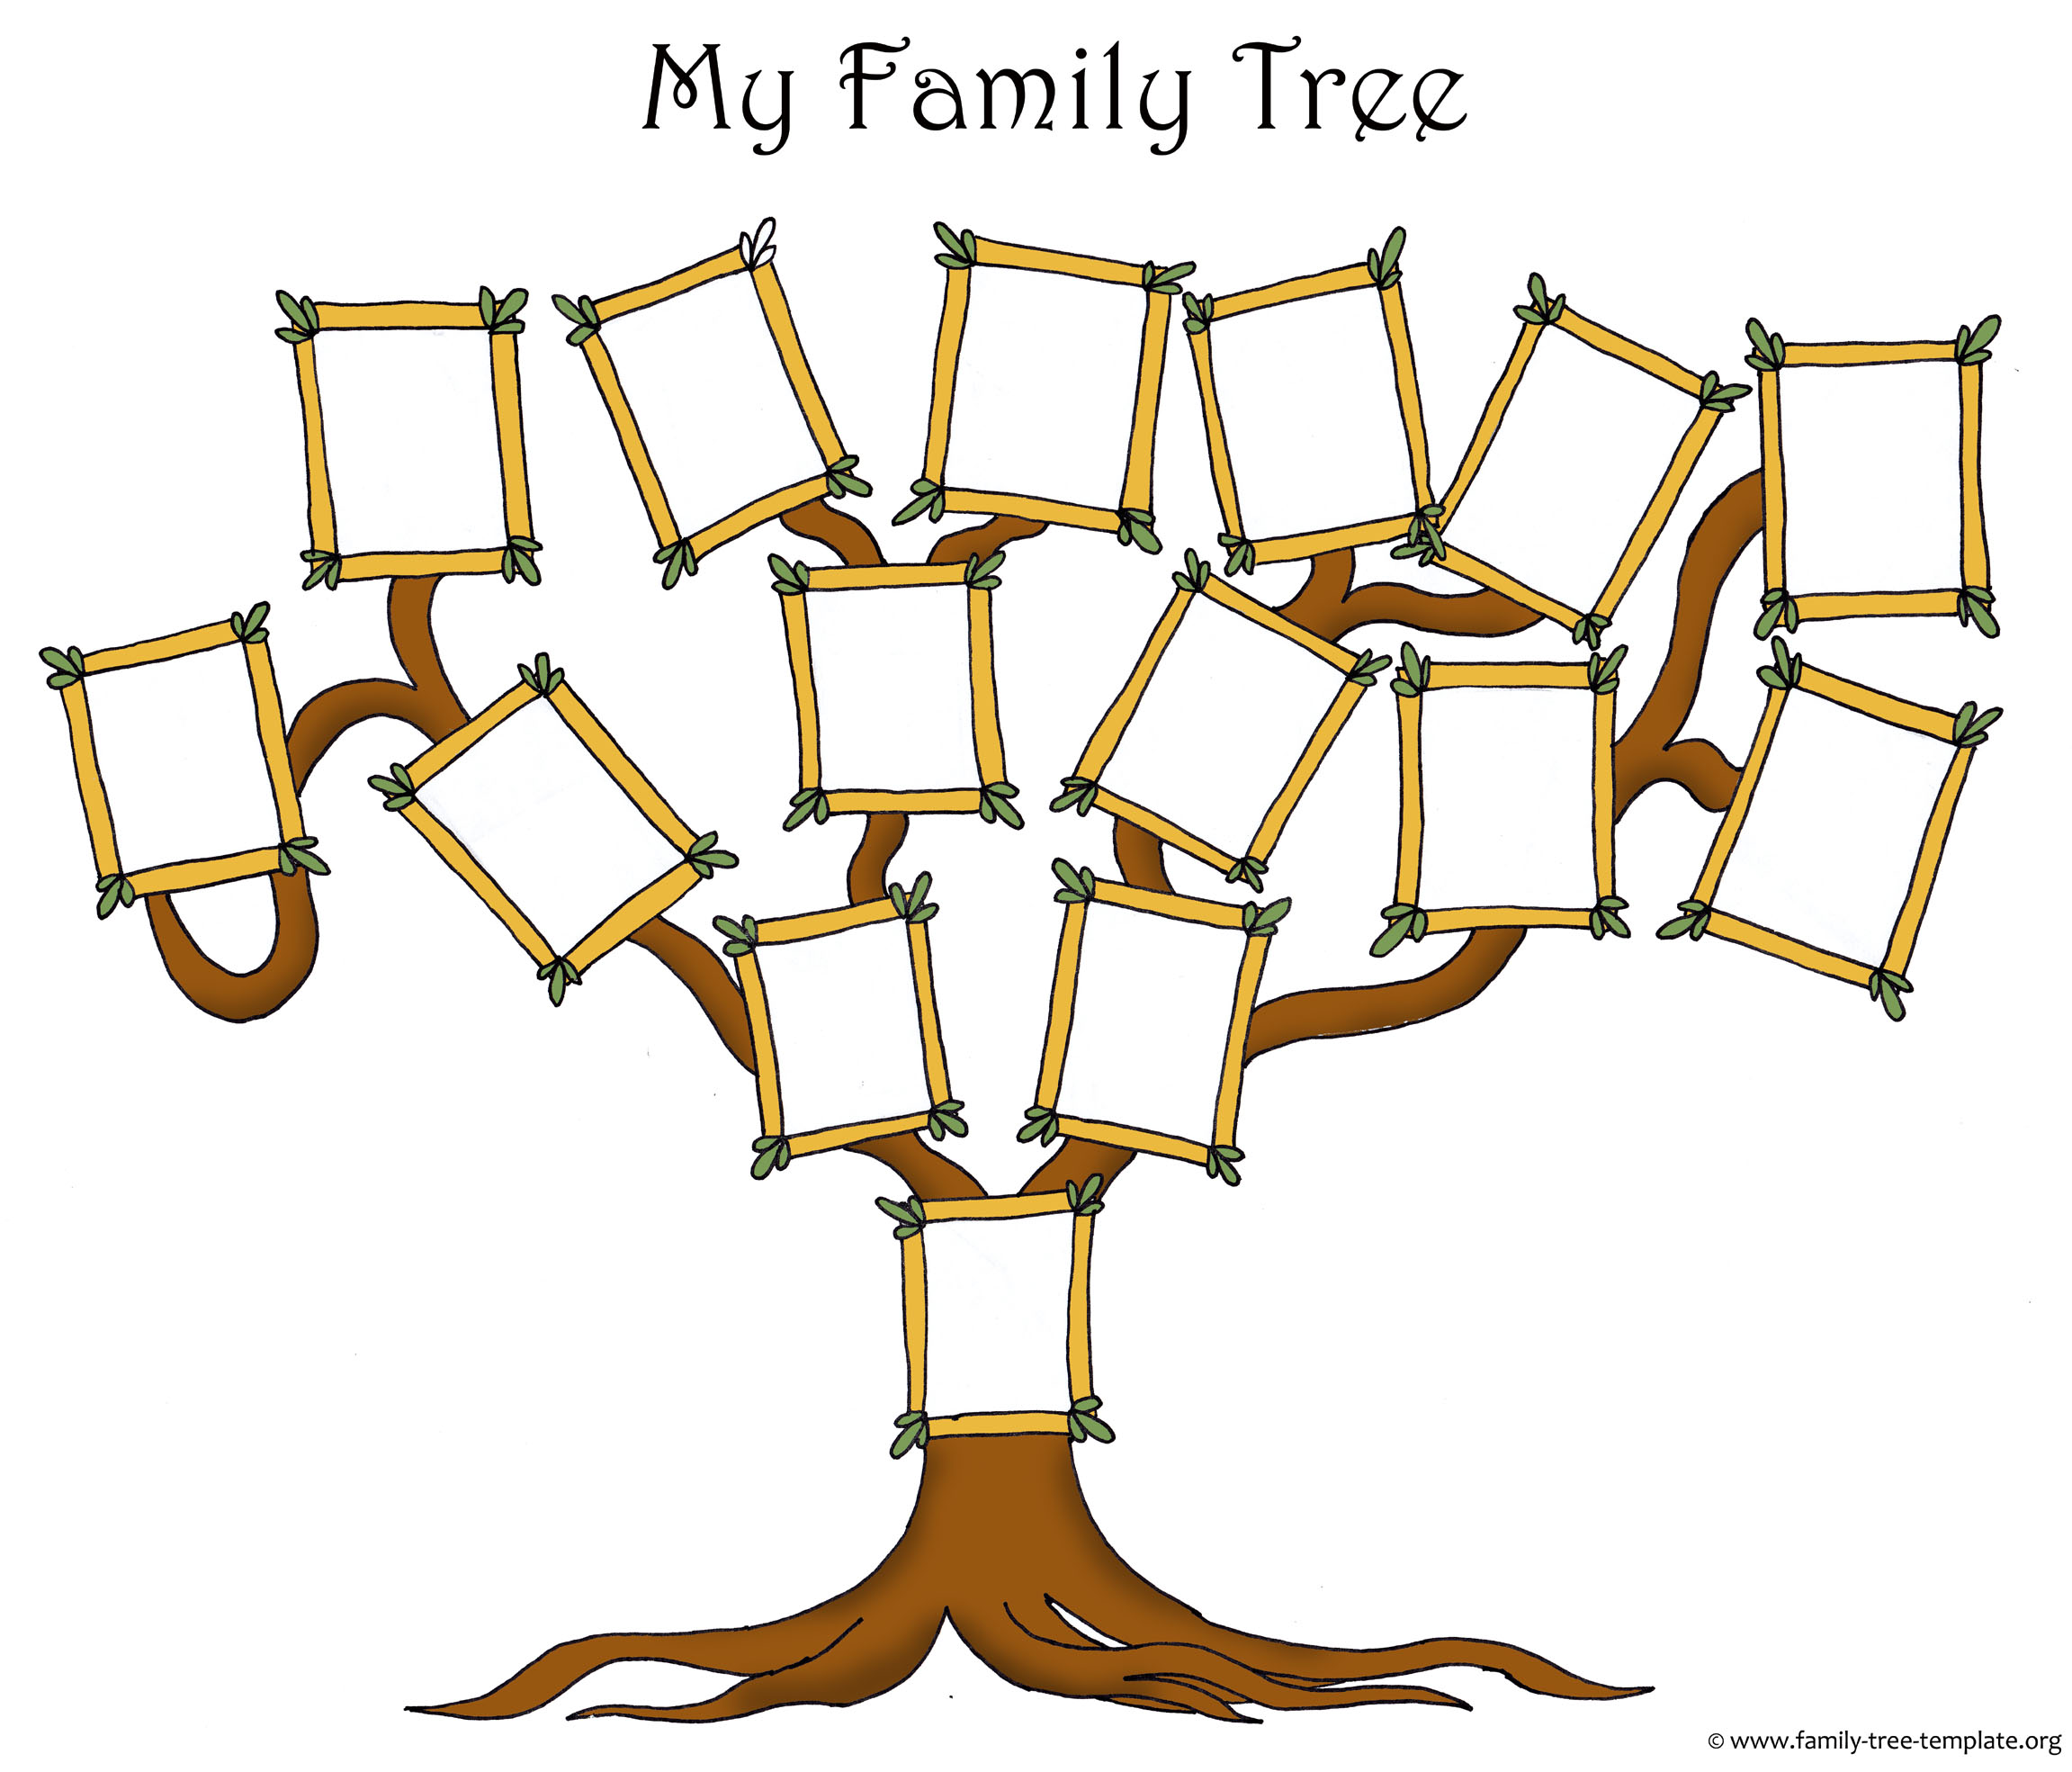 7-best-images-of-free-printable-family-tree-stencils-fingerprint-tree-template-blank-family